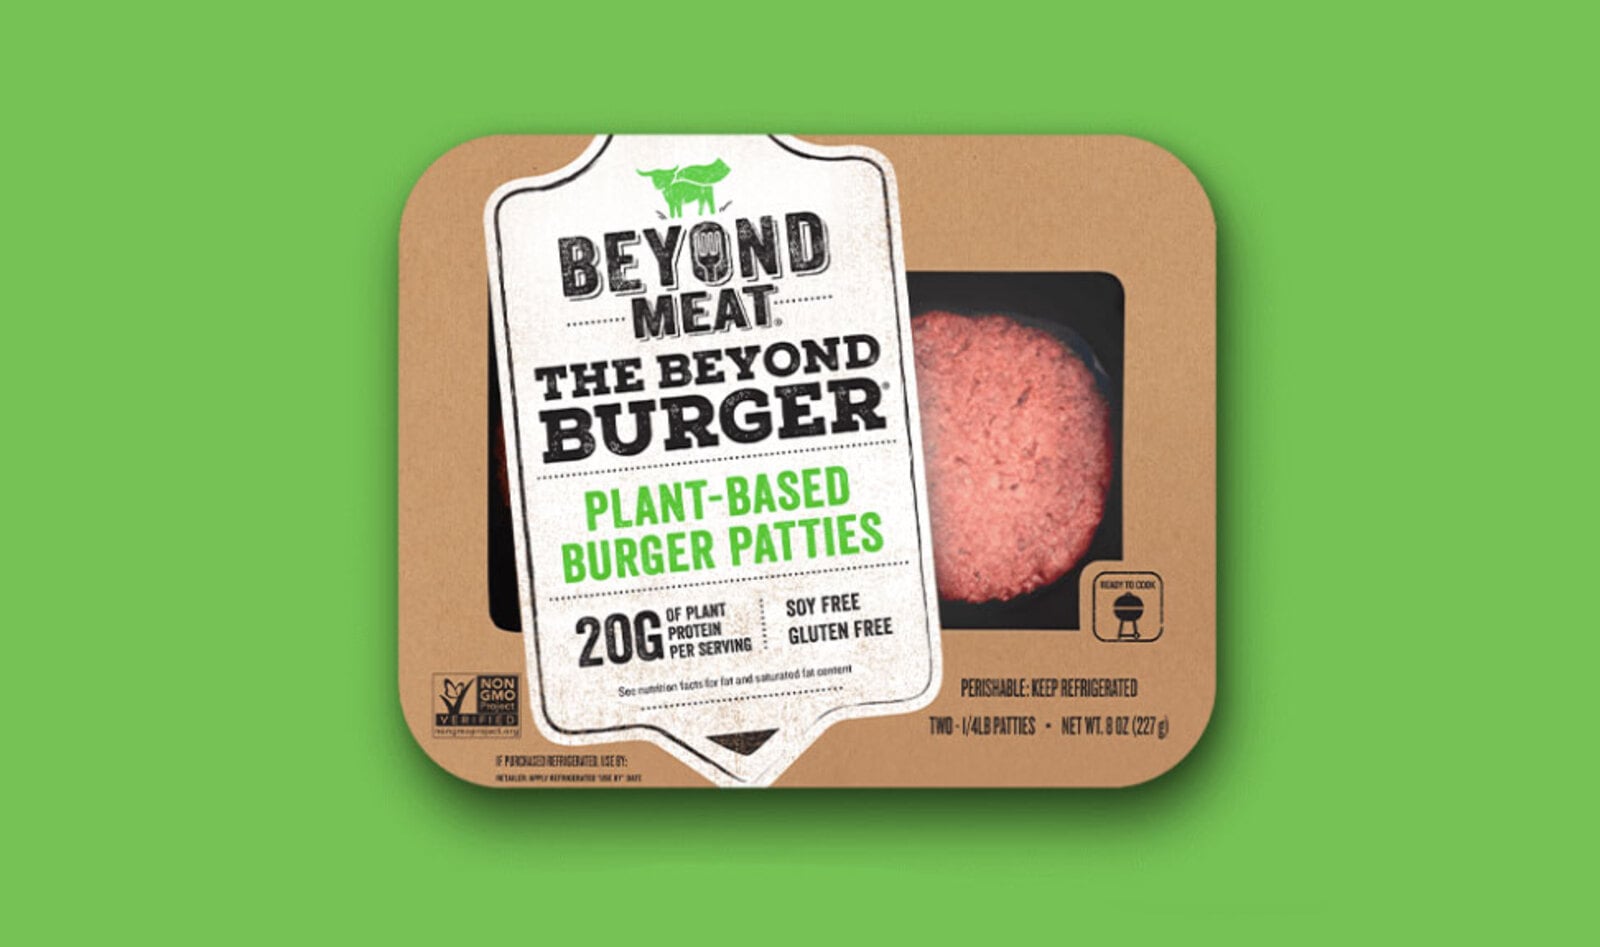 Tyson Sells Beyond Meat Shares to Develop Its Own Vegan Products